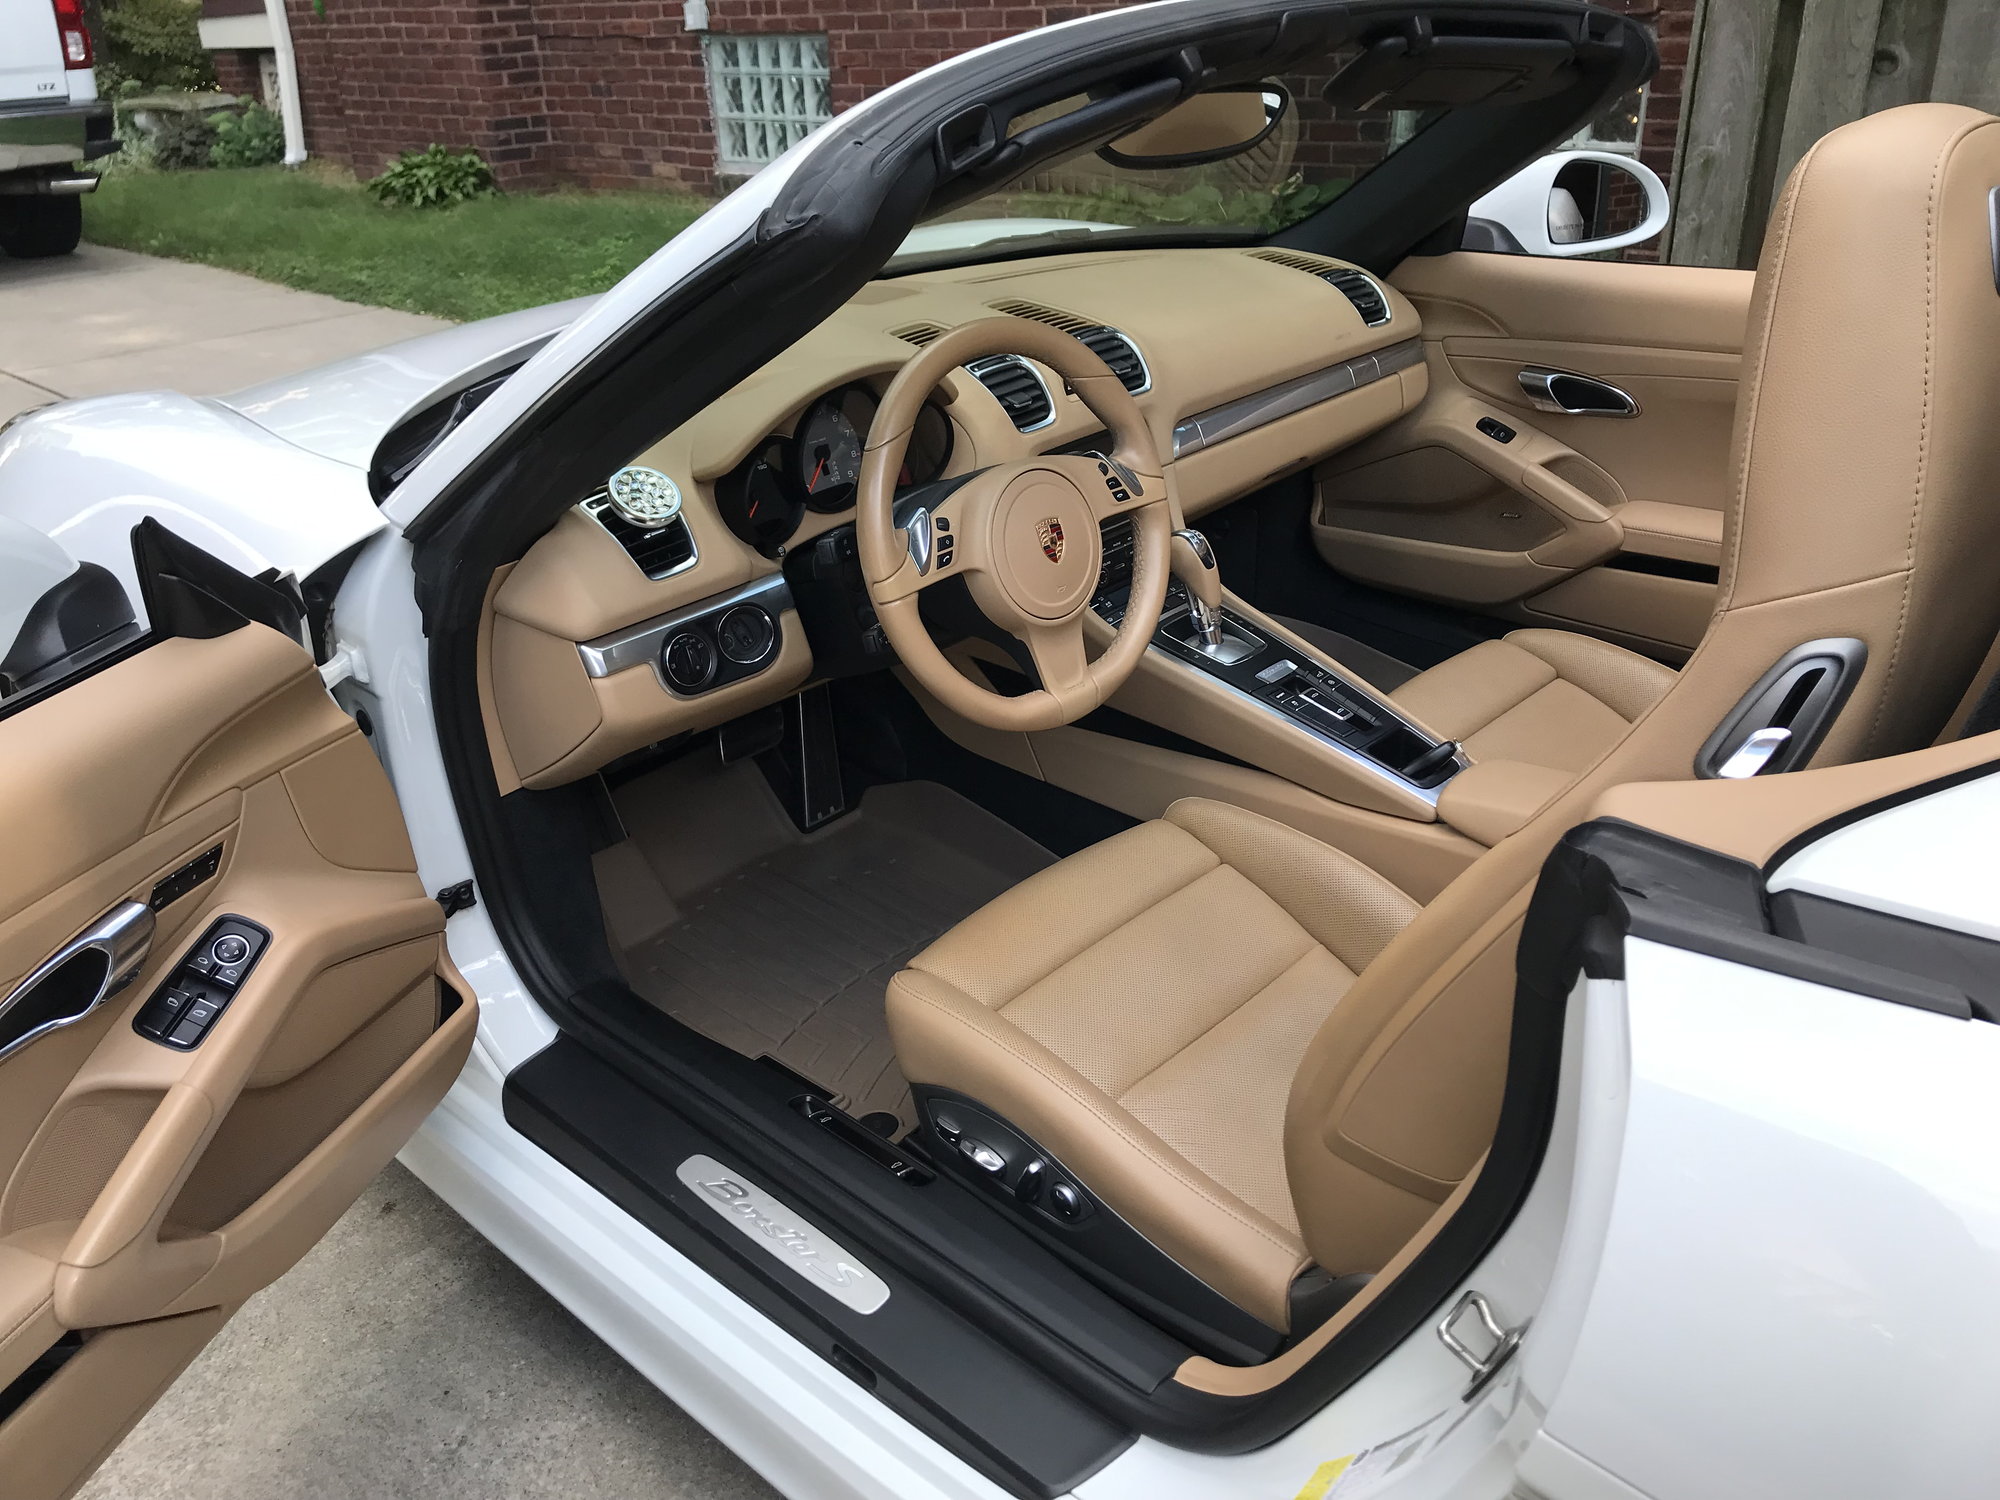 2013 Porsche Boxster - 2013 Porsche 981 Boxster S PDK white with tan interior - 3.4L - Used - VIN WP0CB2A84DS134124 - 36,851 Miles - 6 cyl - 2WD - Automatic - Convertible - White - Rocky River, OH 44116, United States